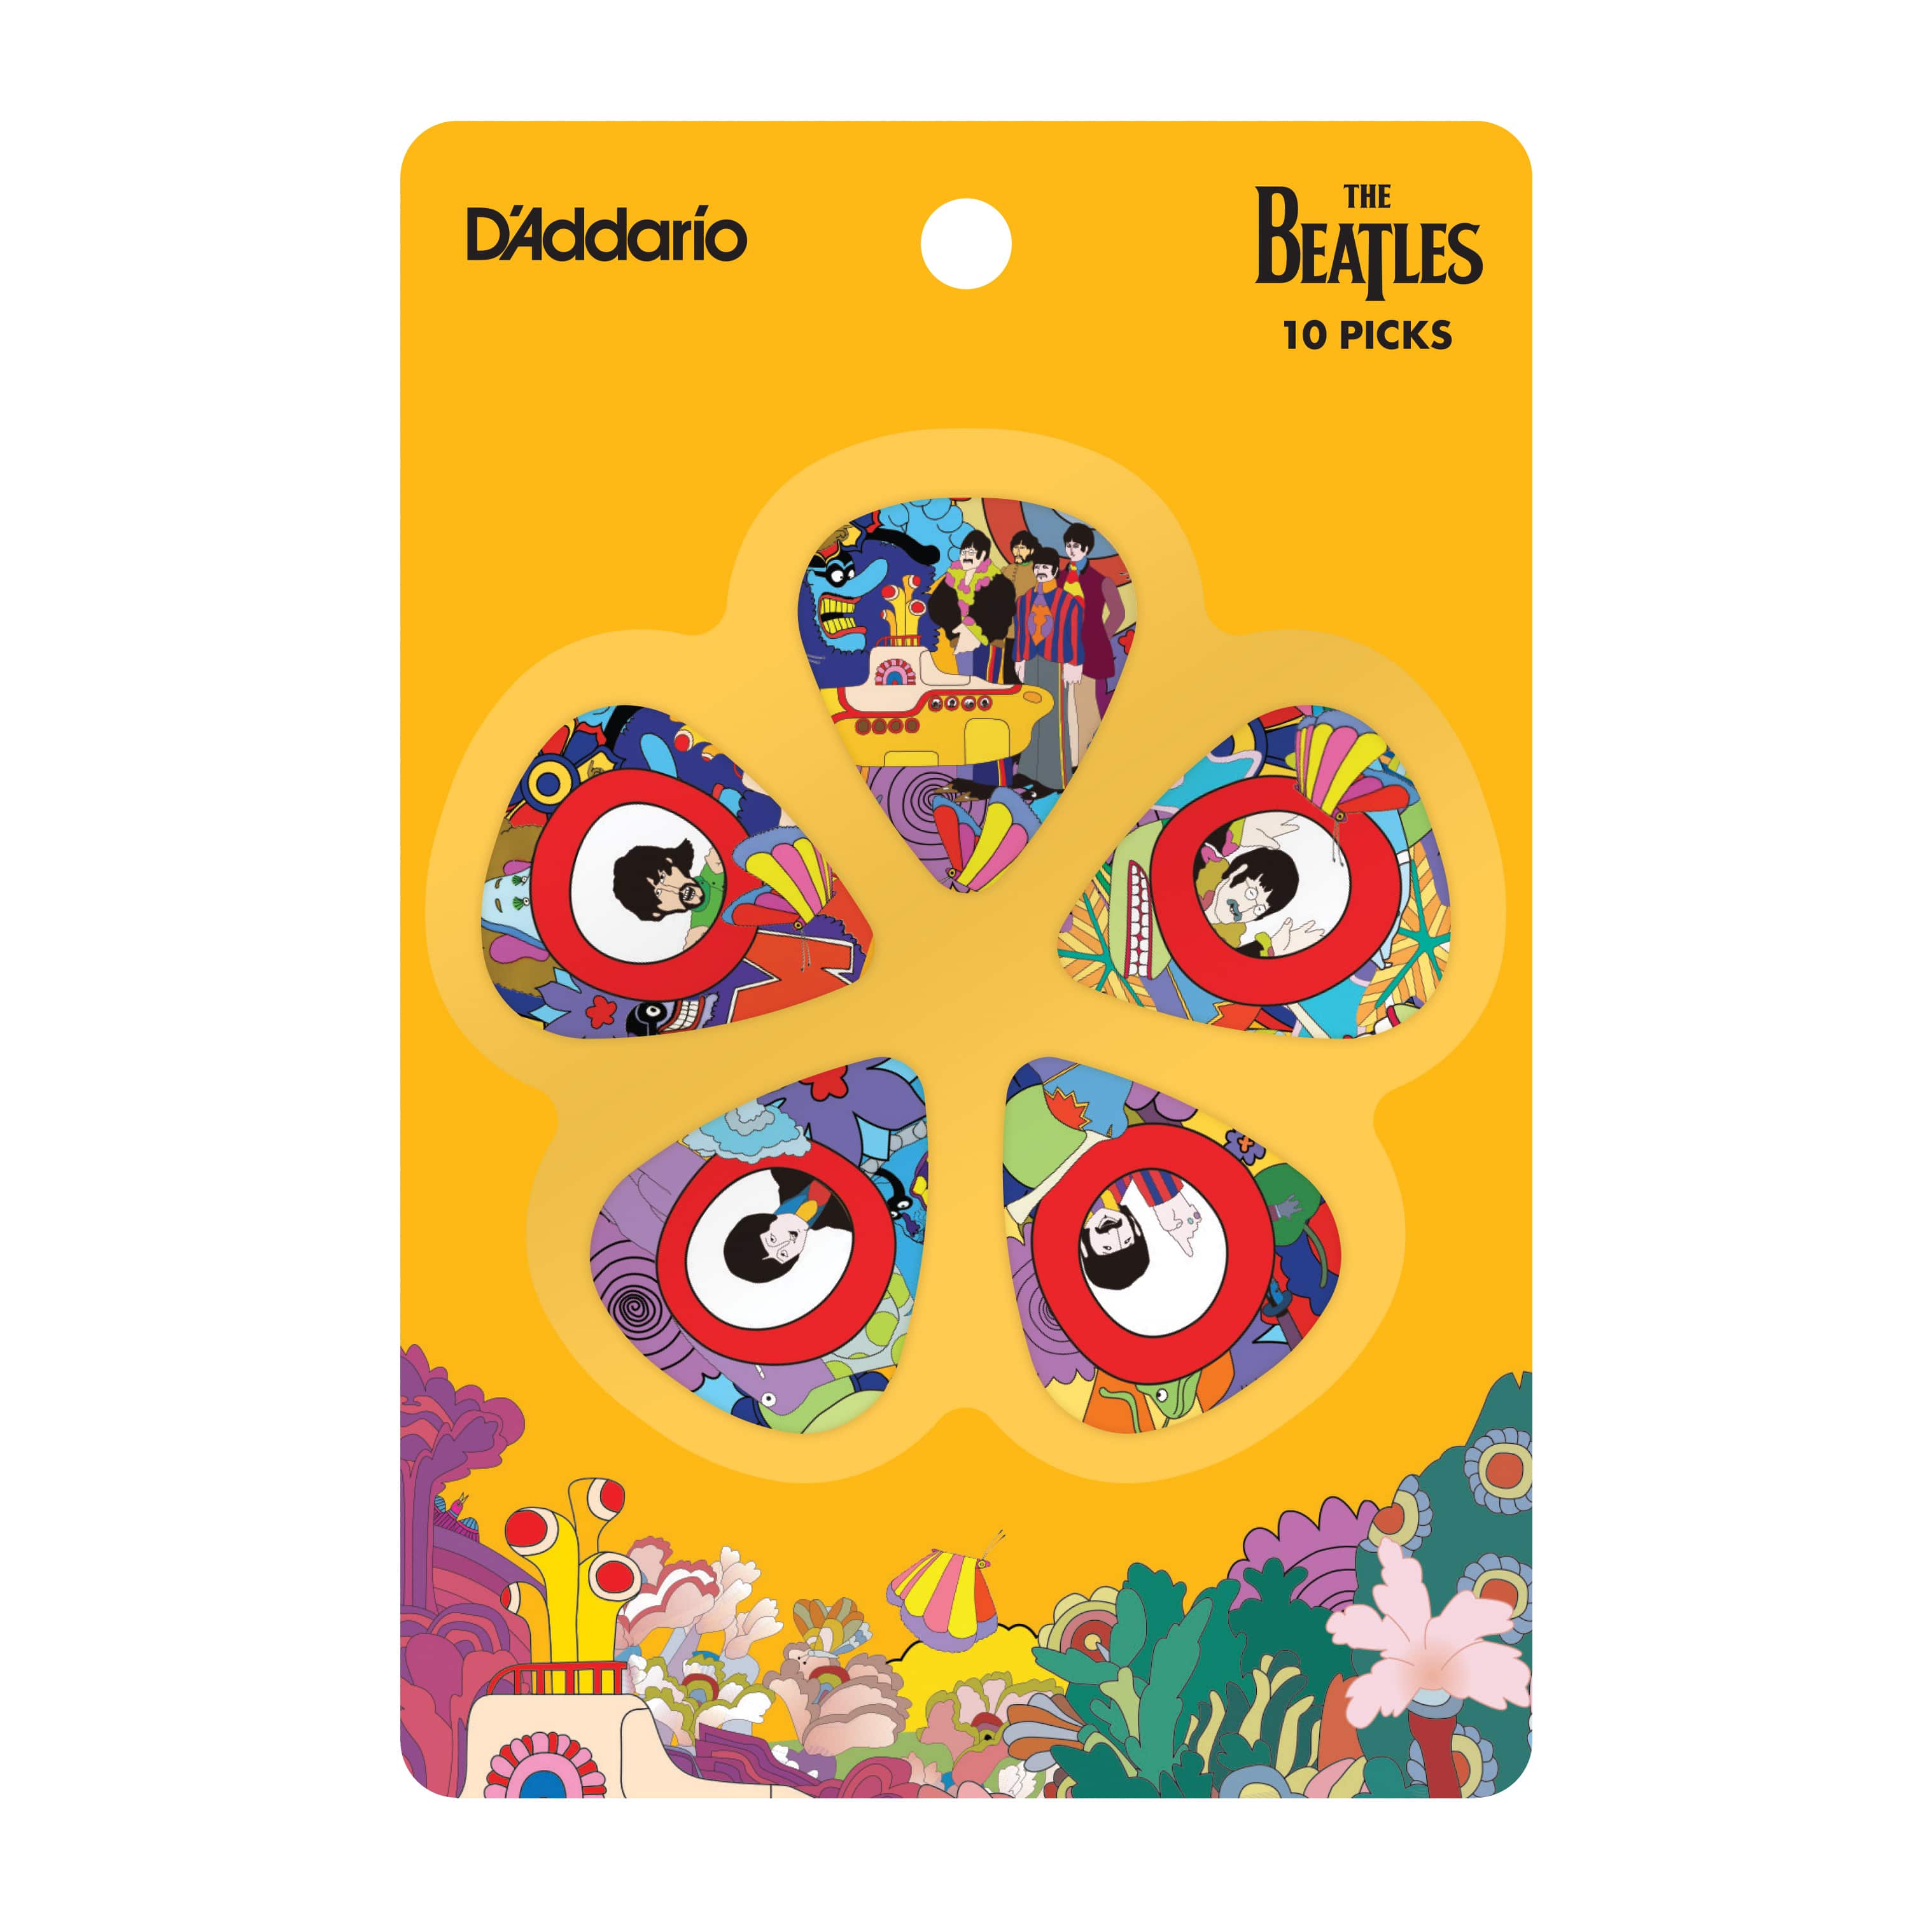 D’Addario Launches The Beatles Yellow Submarine 50th Anniversary Collection